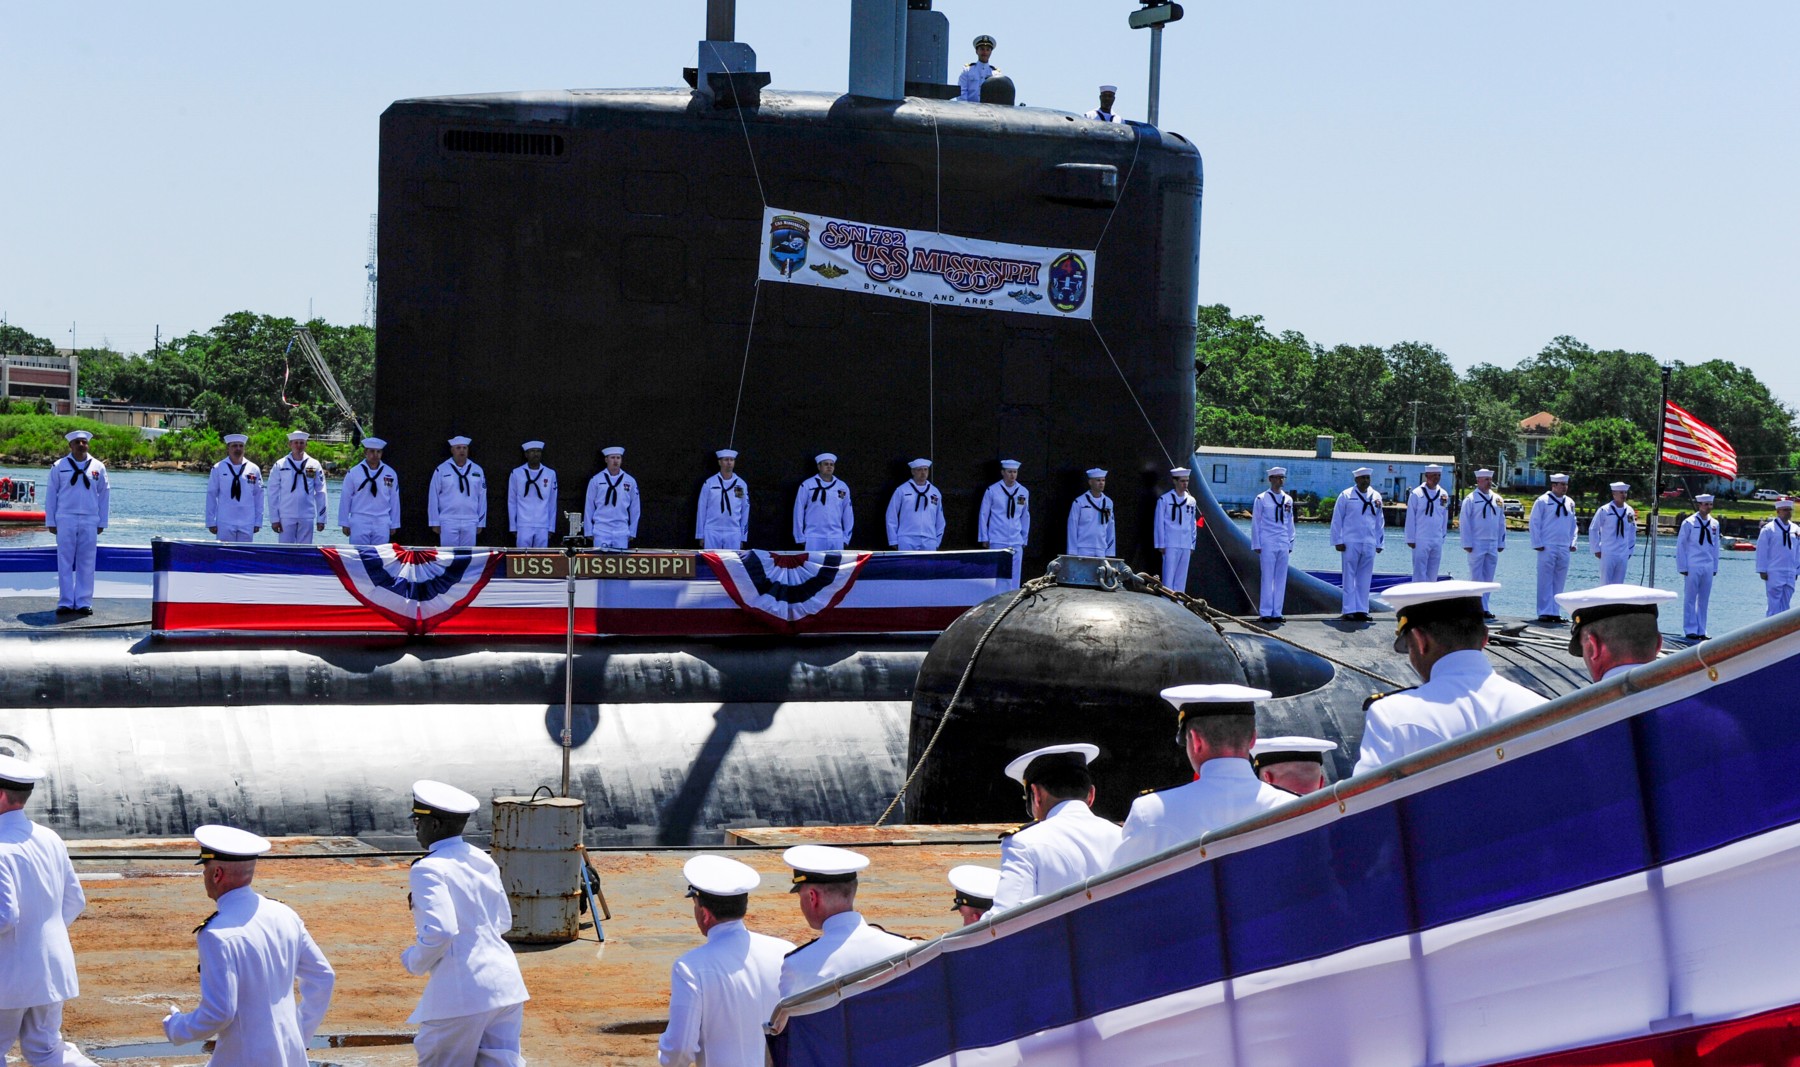 ssn-782 uss mississippi virginia class attack submarine us navy 13 commissioning ceremony